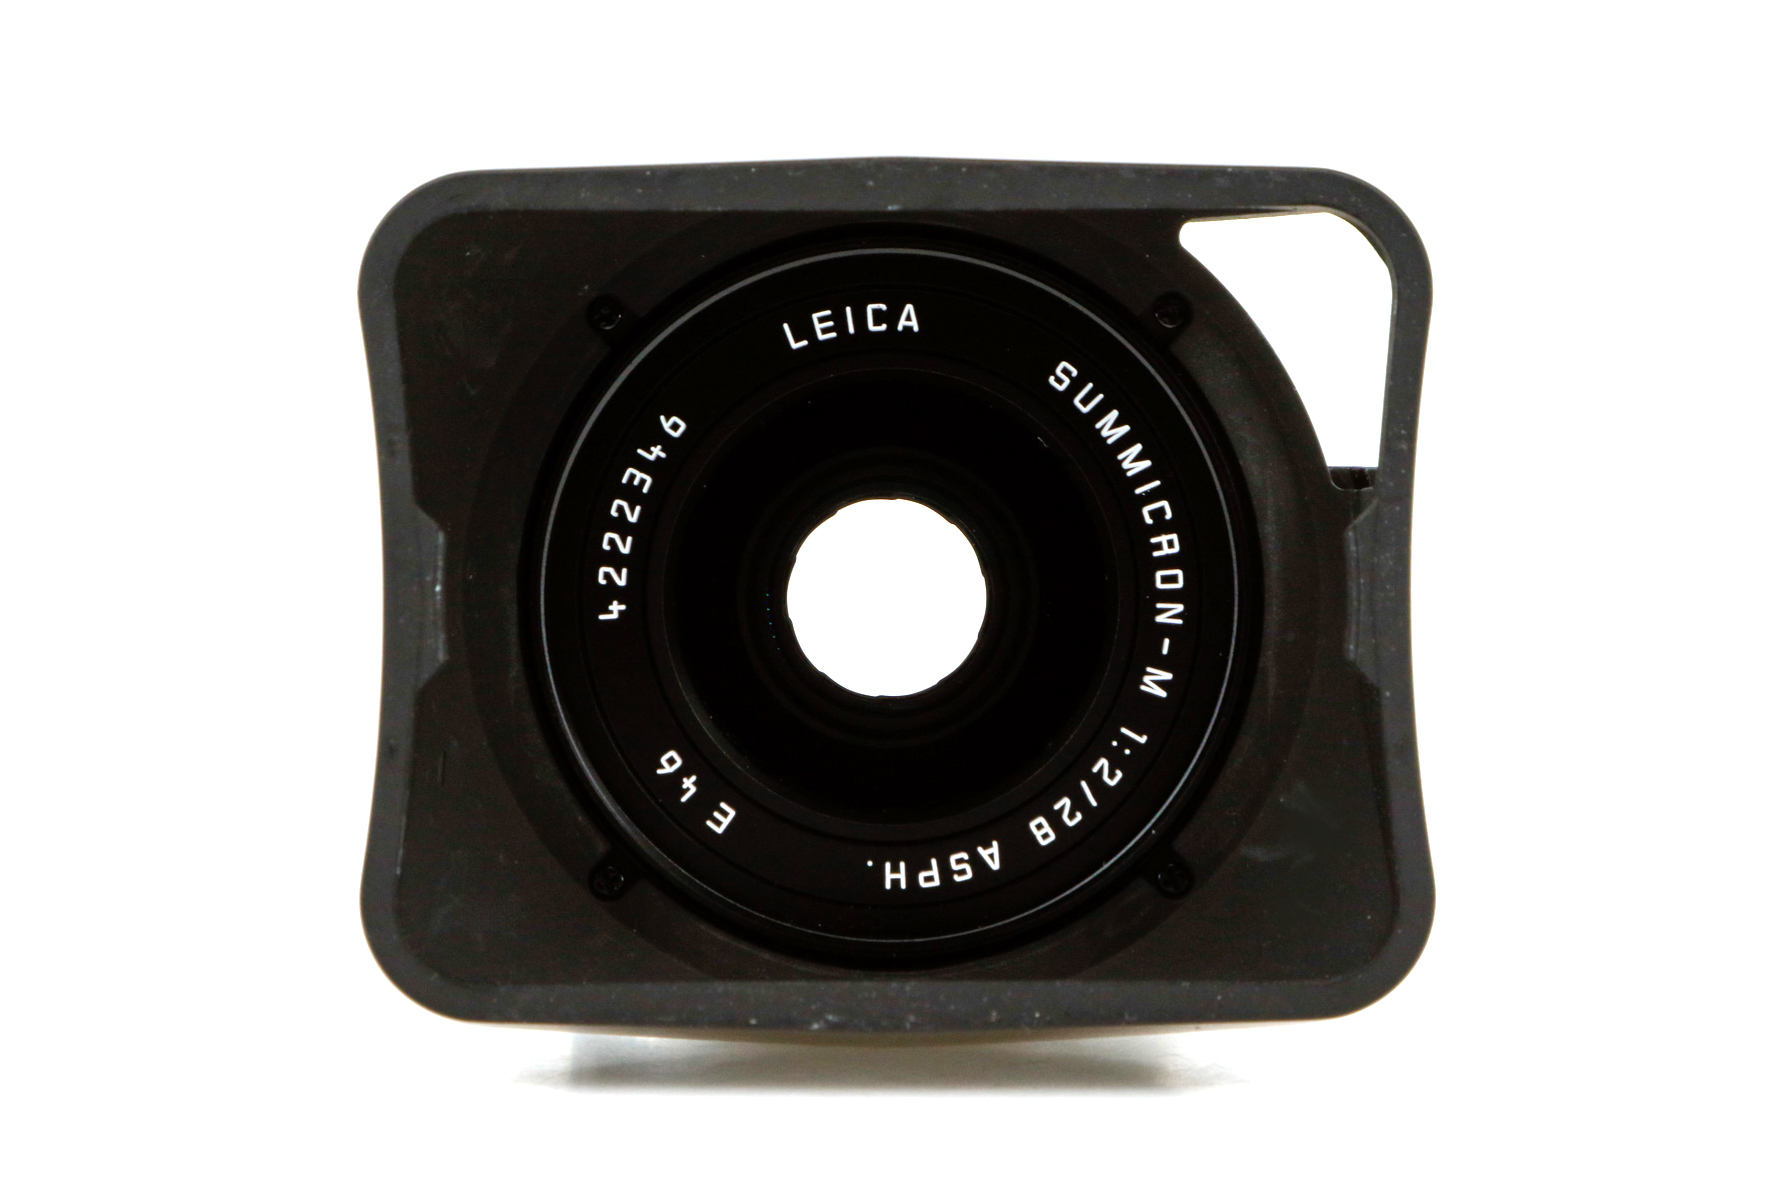 LEICA Summicron-M 2.0/28mm ASPH black with Original Packaging